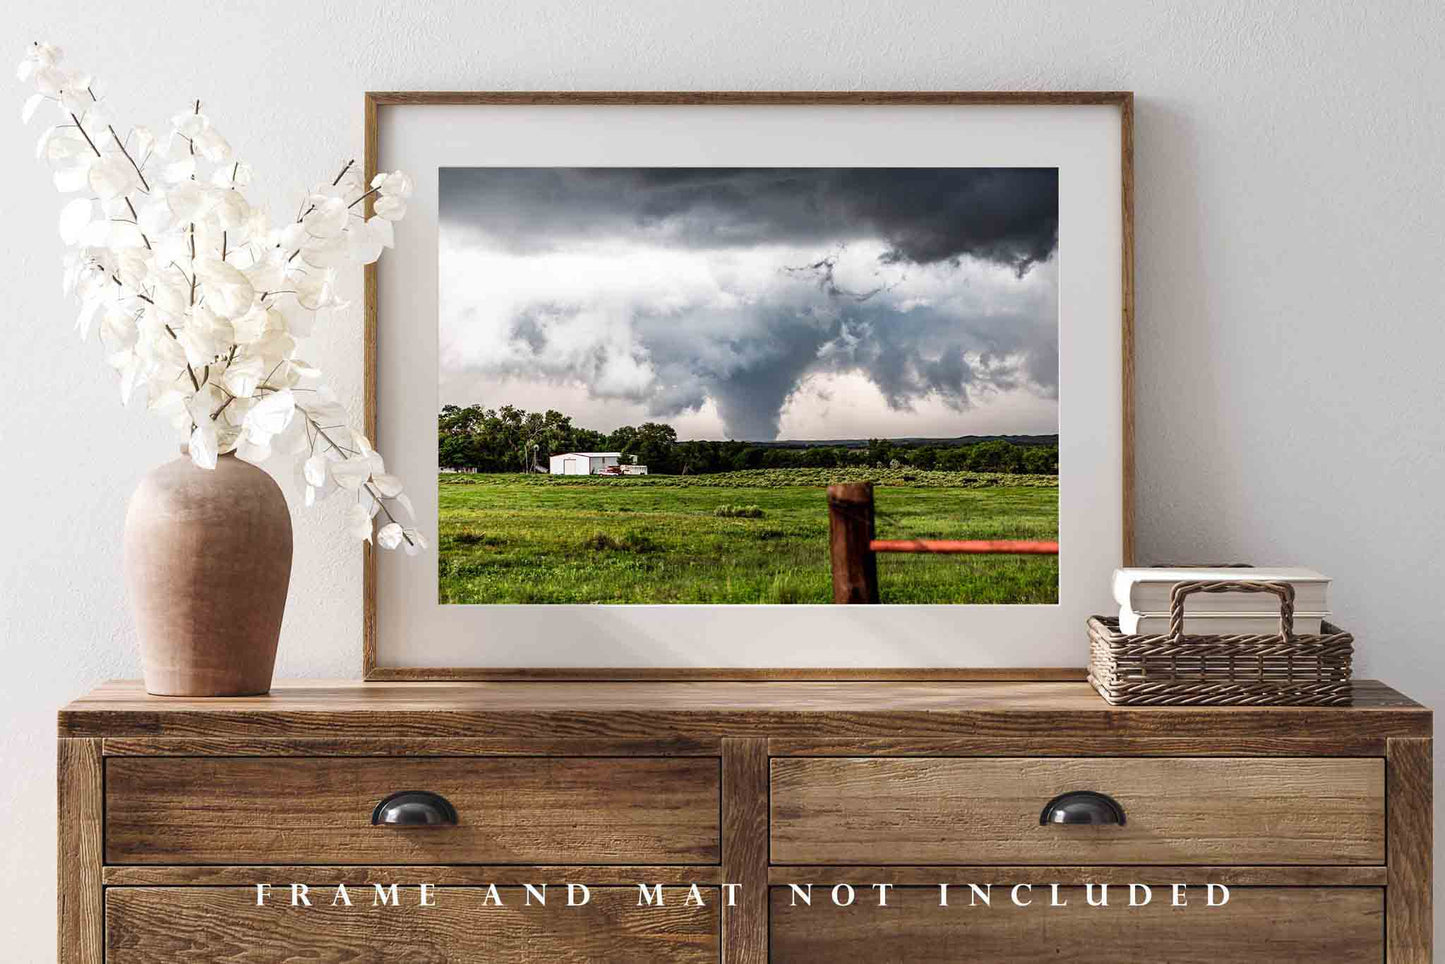 Storm Photography Print - Picture of Large Tornado on Spring Day in Texas Panhandle Thunderstorm Home Decor Weather Wall Art Photo Artwork